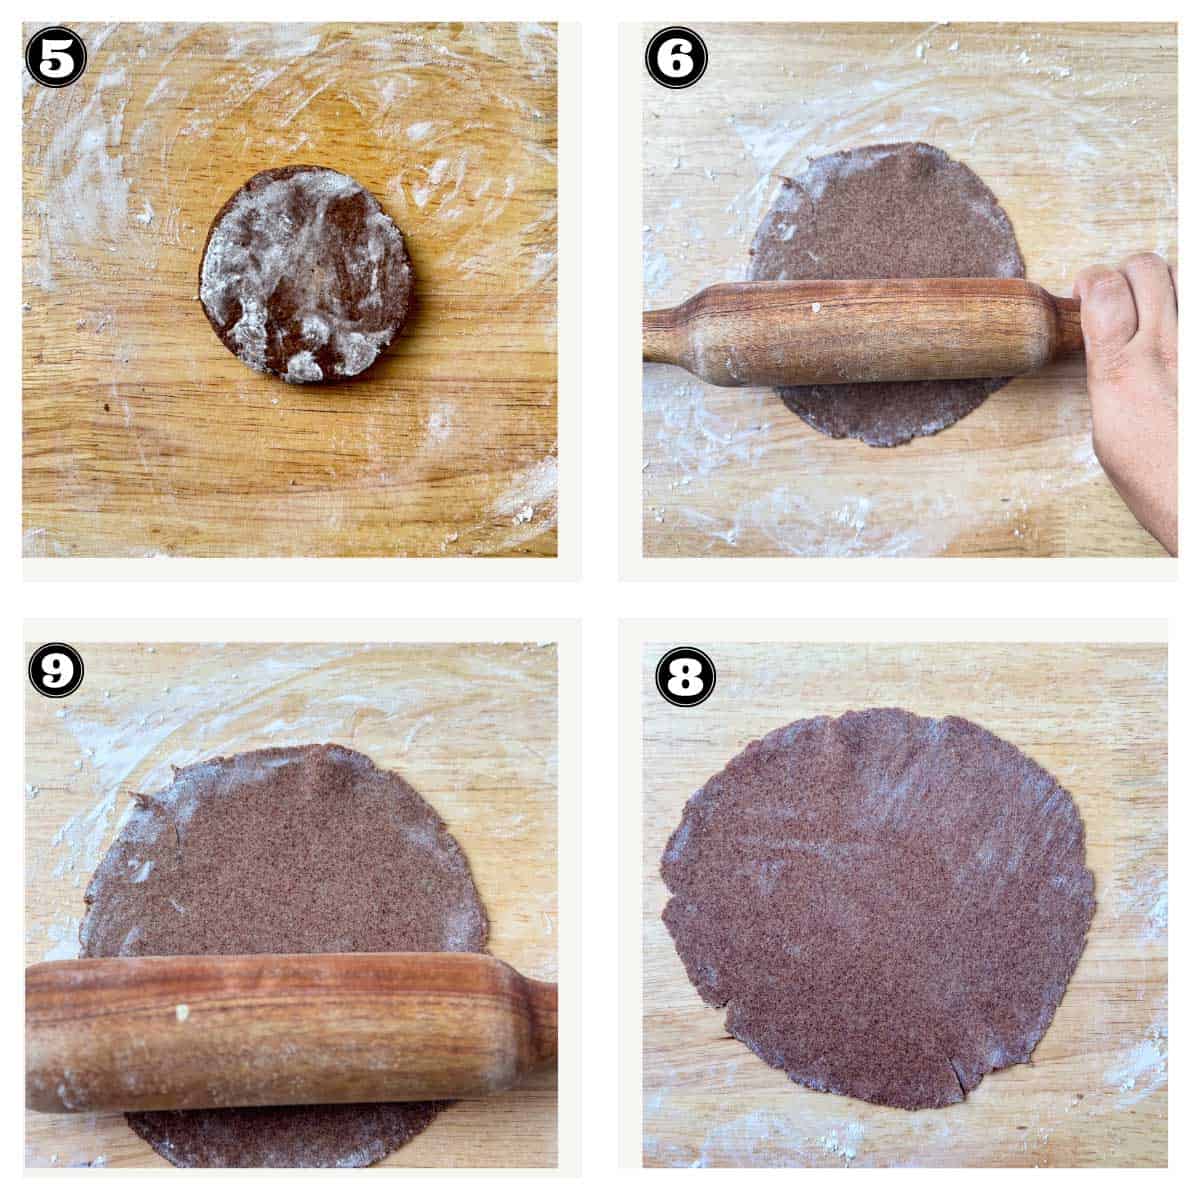 images showing steps involved in rolling the nachni roti using a rolling pin